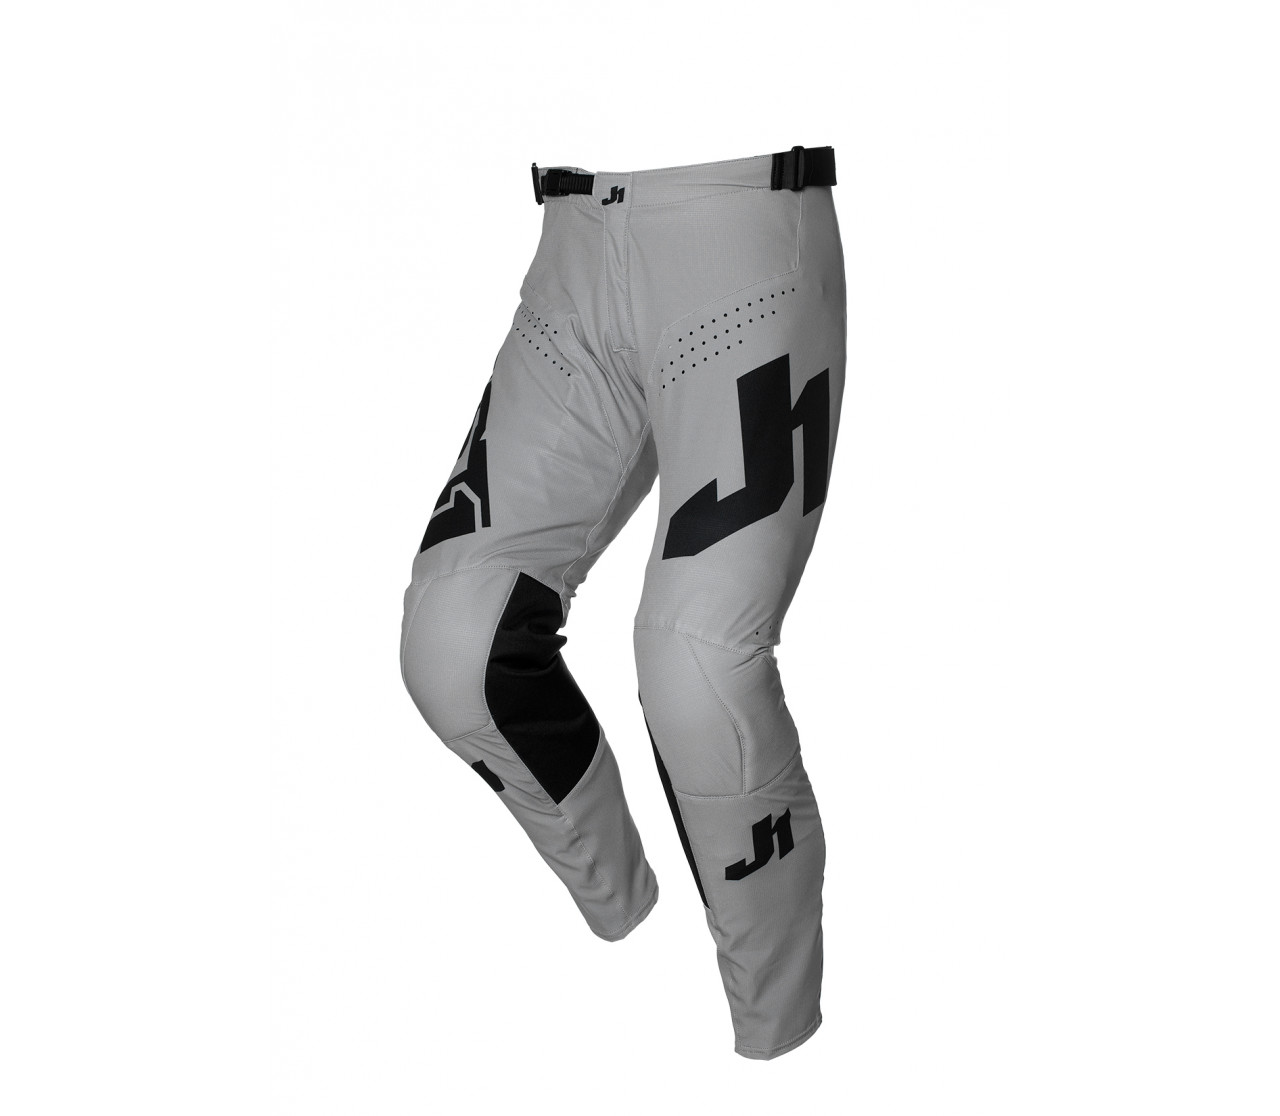 JUST1 PANTS J-ESSENTIAL YOUTH SOLID GREY BLACK